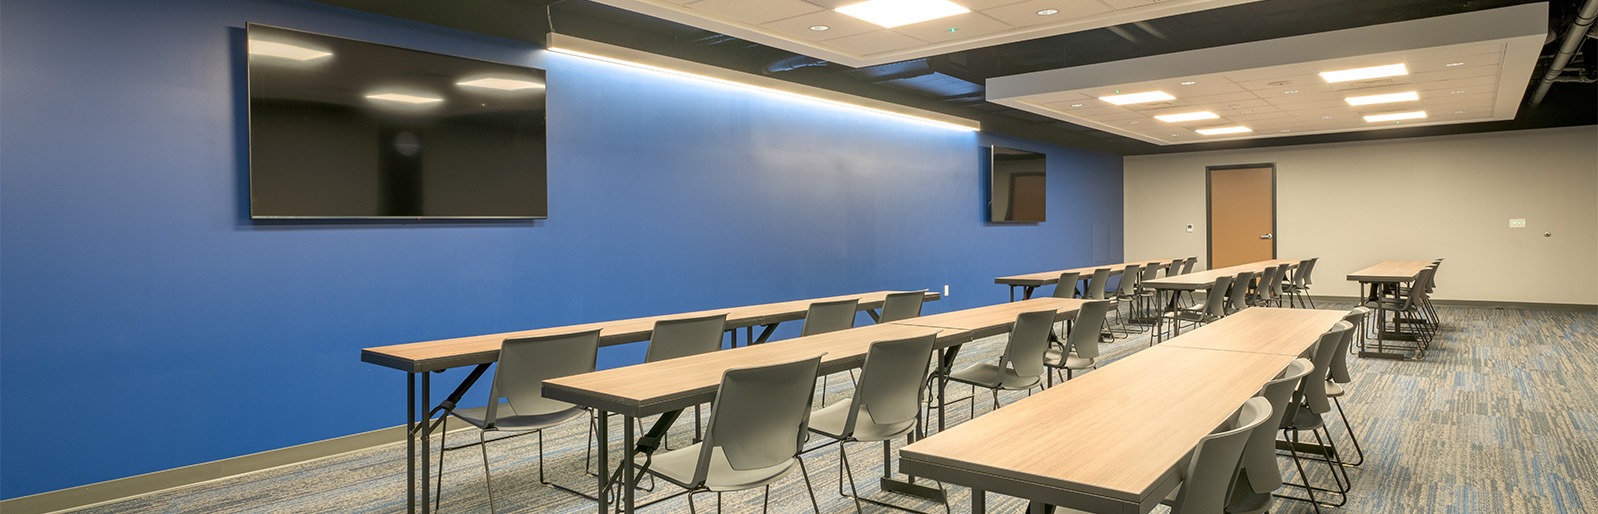 A classroom/meeting space within Northwood University's Lower Miner Hall.